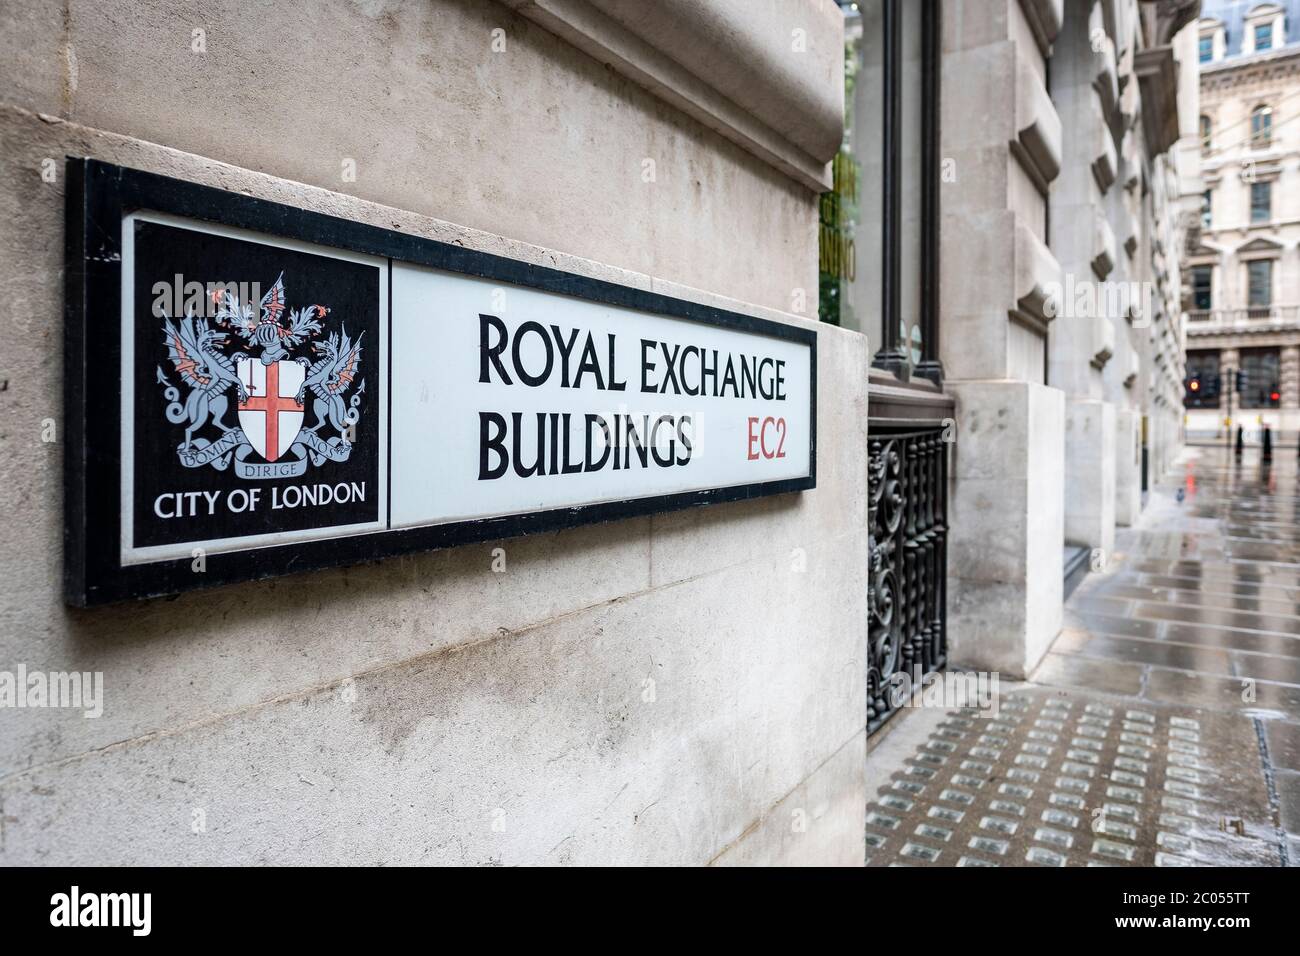 London - Royal Exchange Building road sign in the City of London Stock Photo